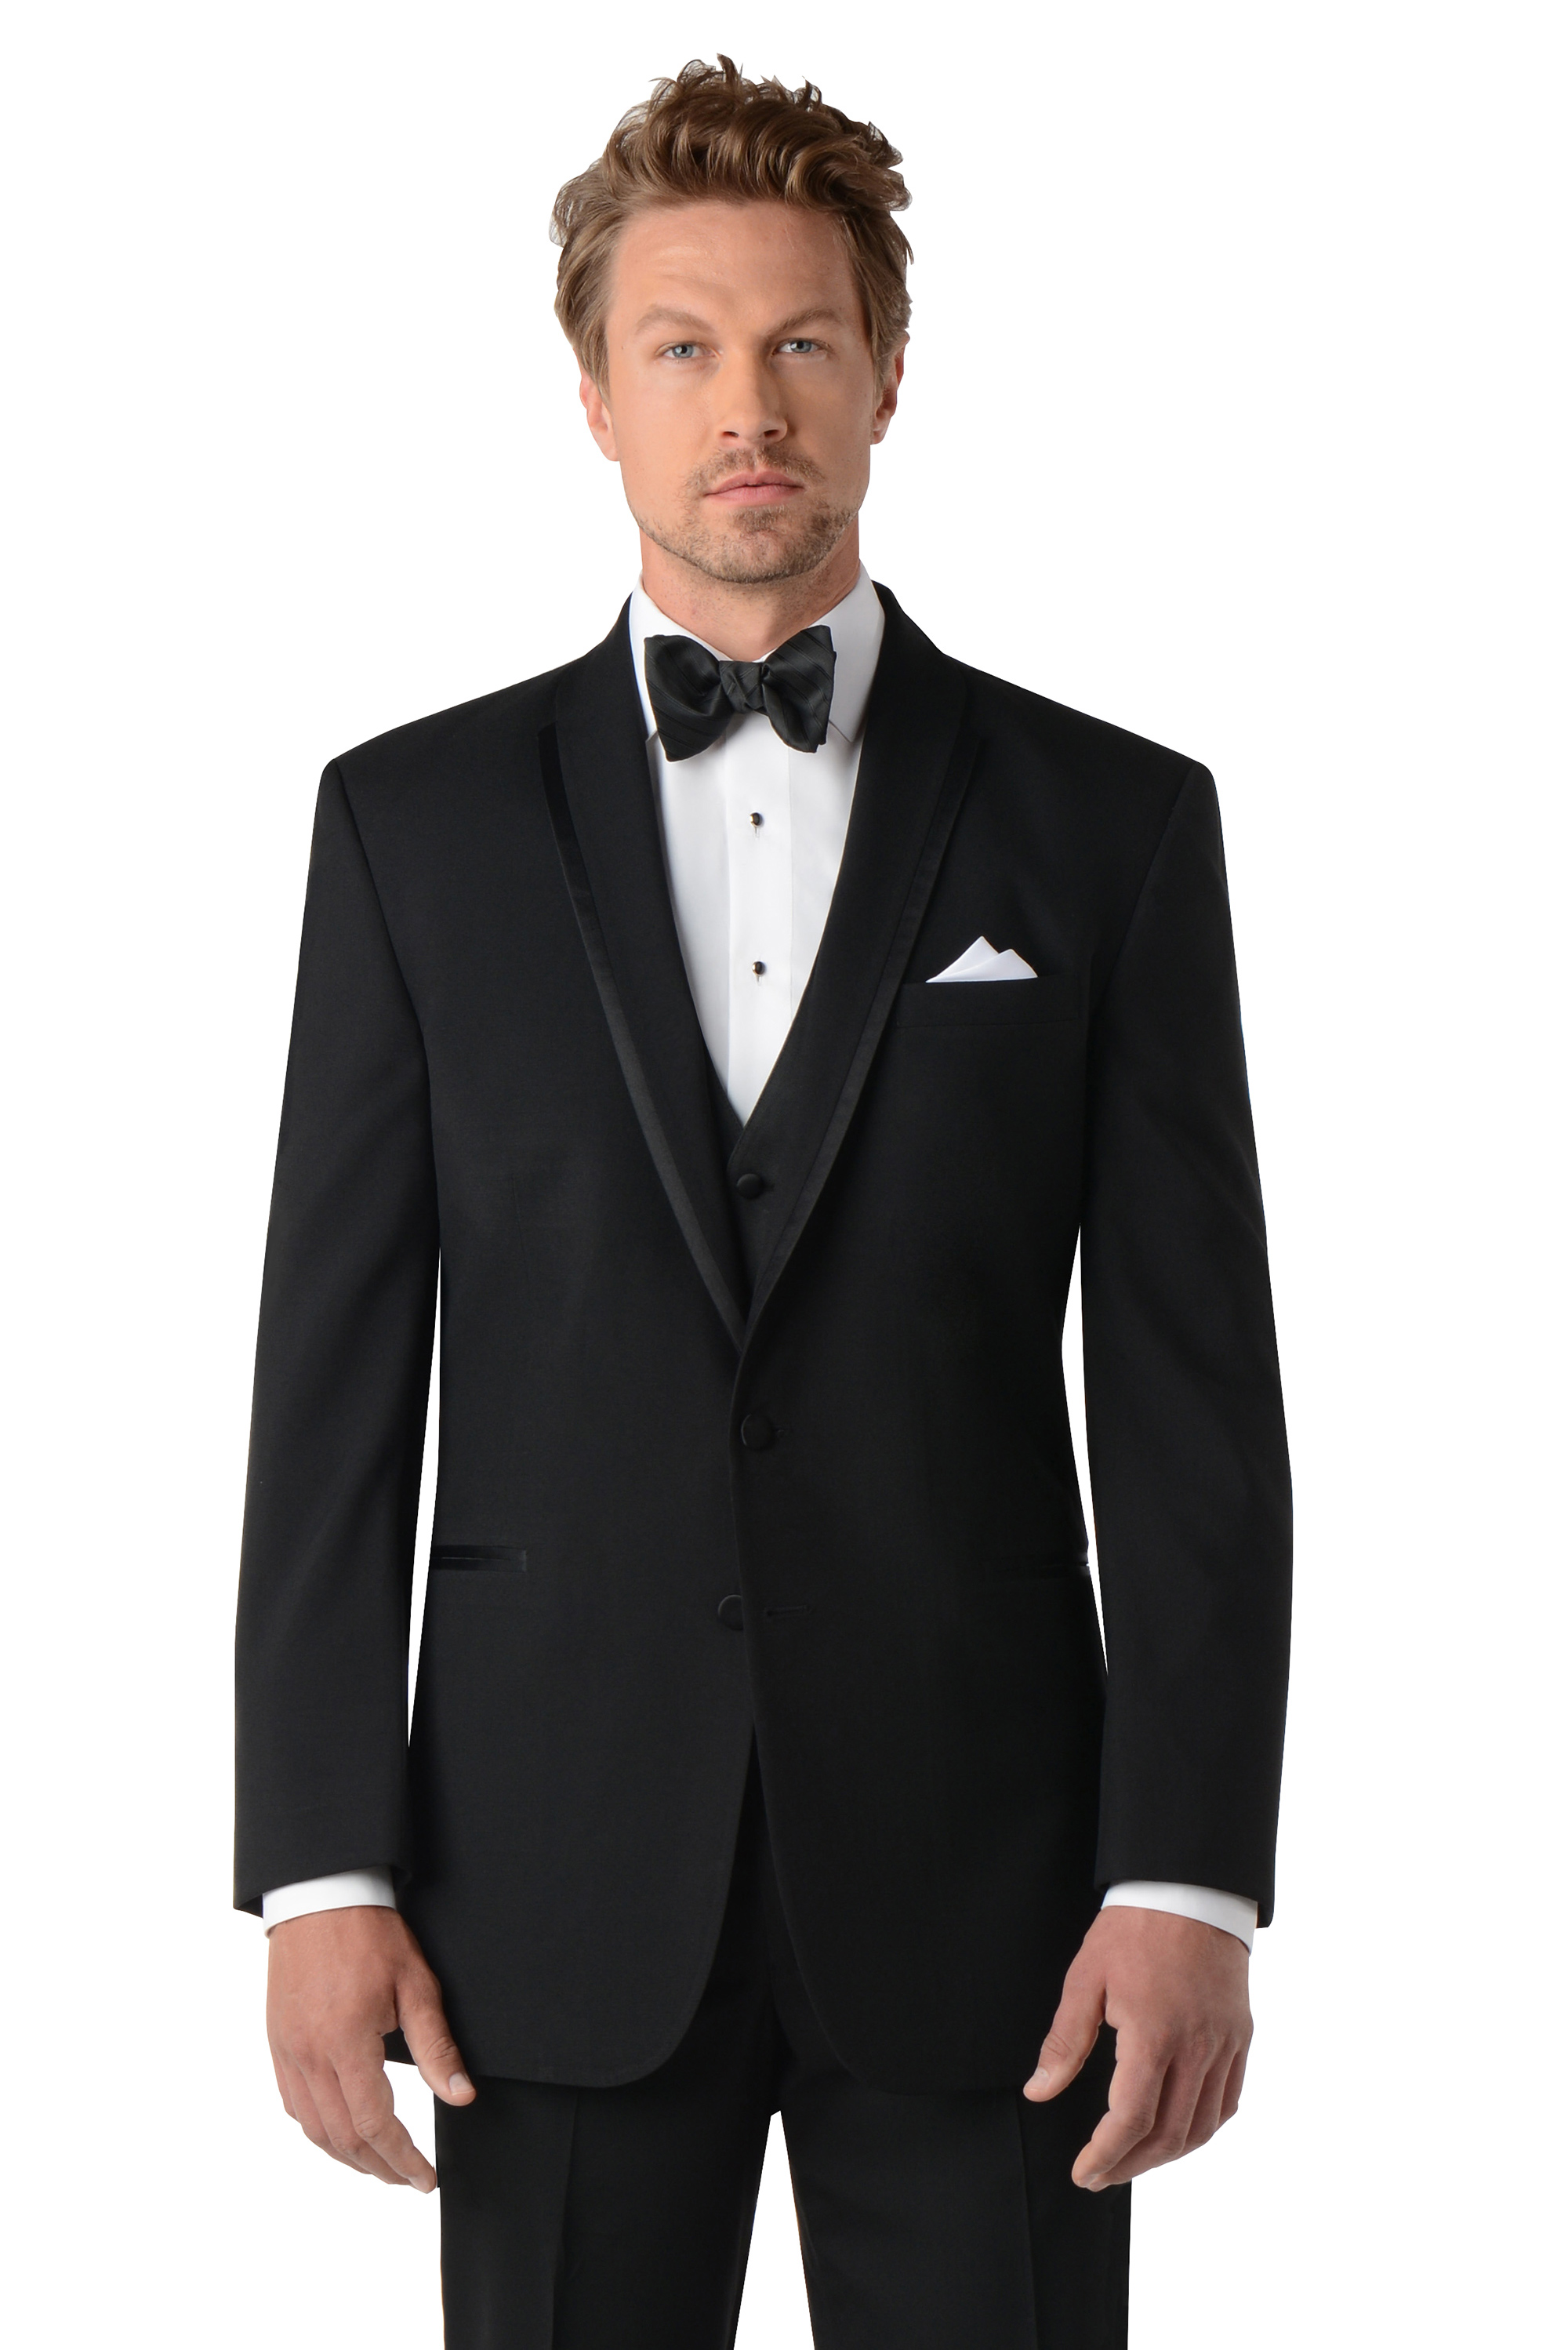 Details about   Mens 44 R  Black La Strada  by After Six Tuxedo Jacket and Pant 